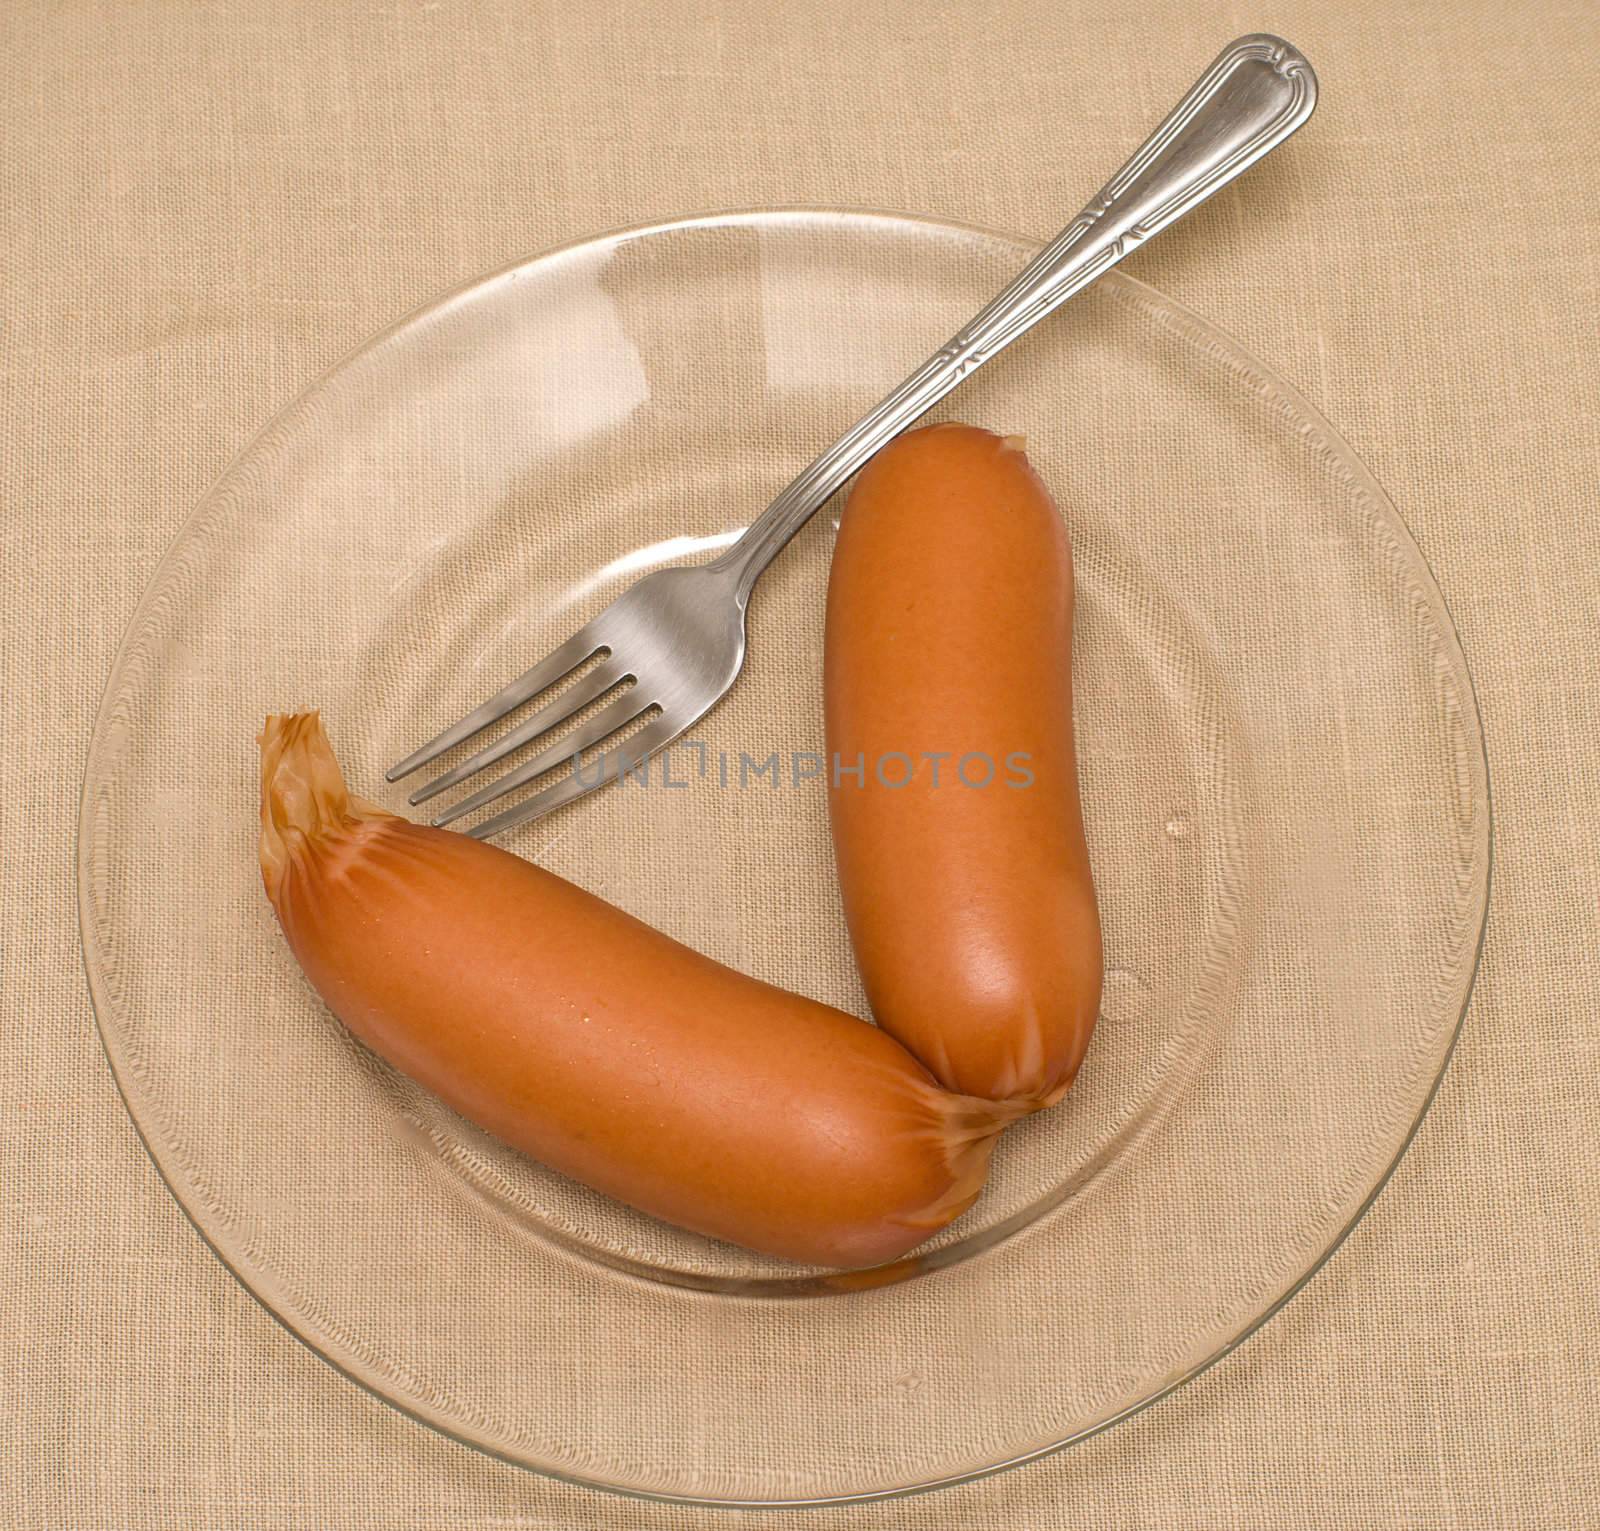 Sausages and a fork on a transparent plate.